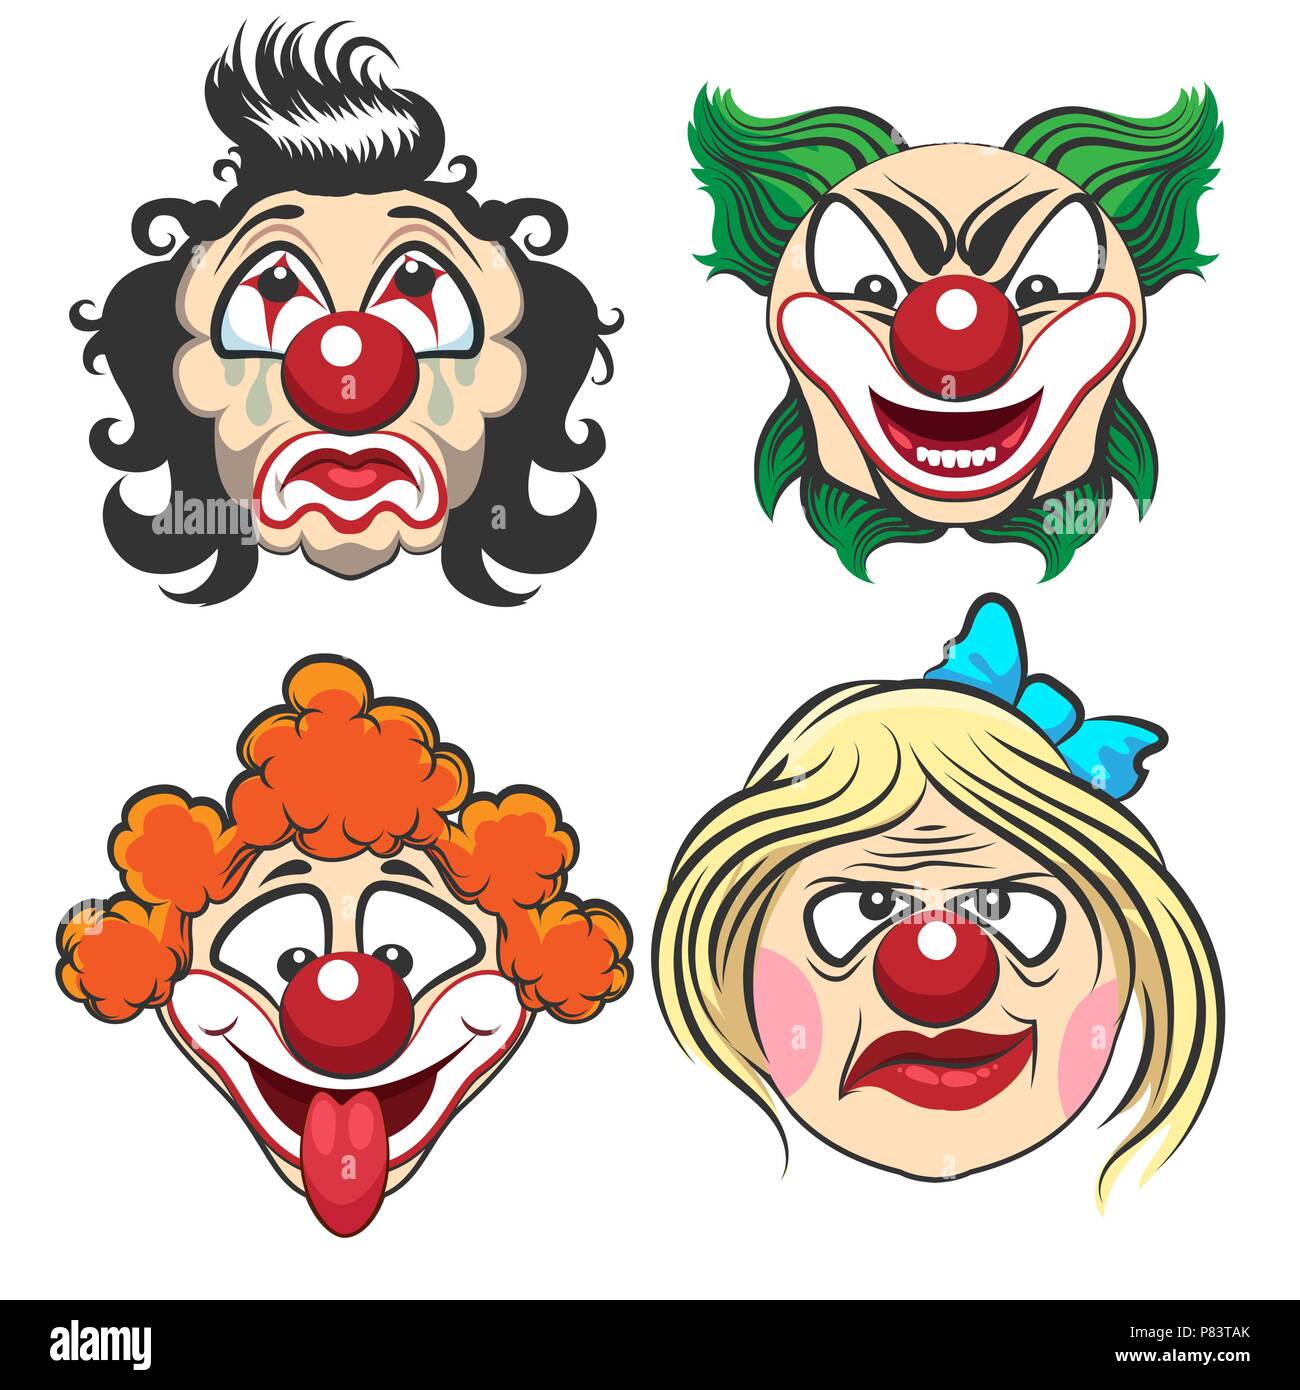 Clown circus Cut Out Stock Images & Pictures - Alamy